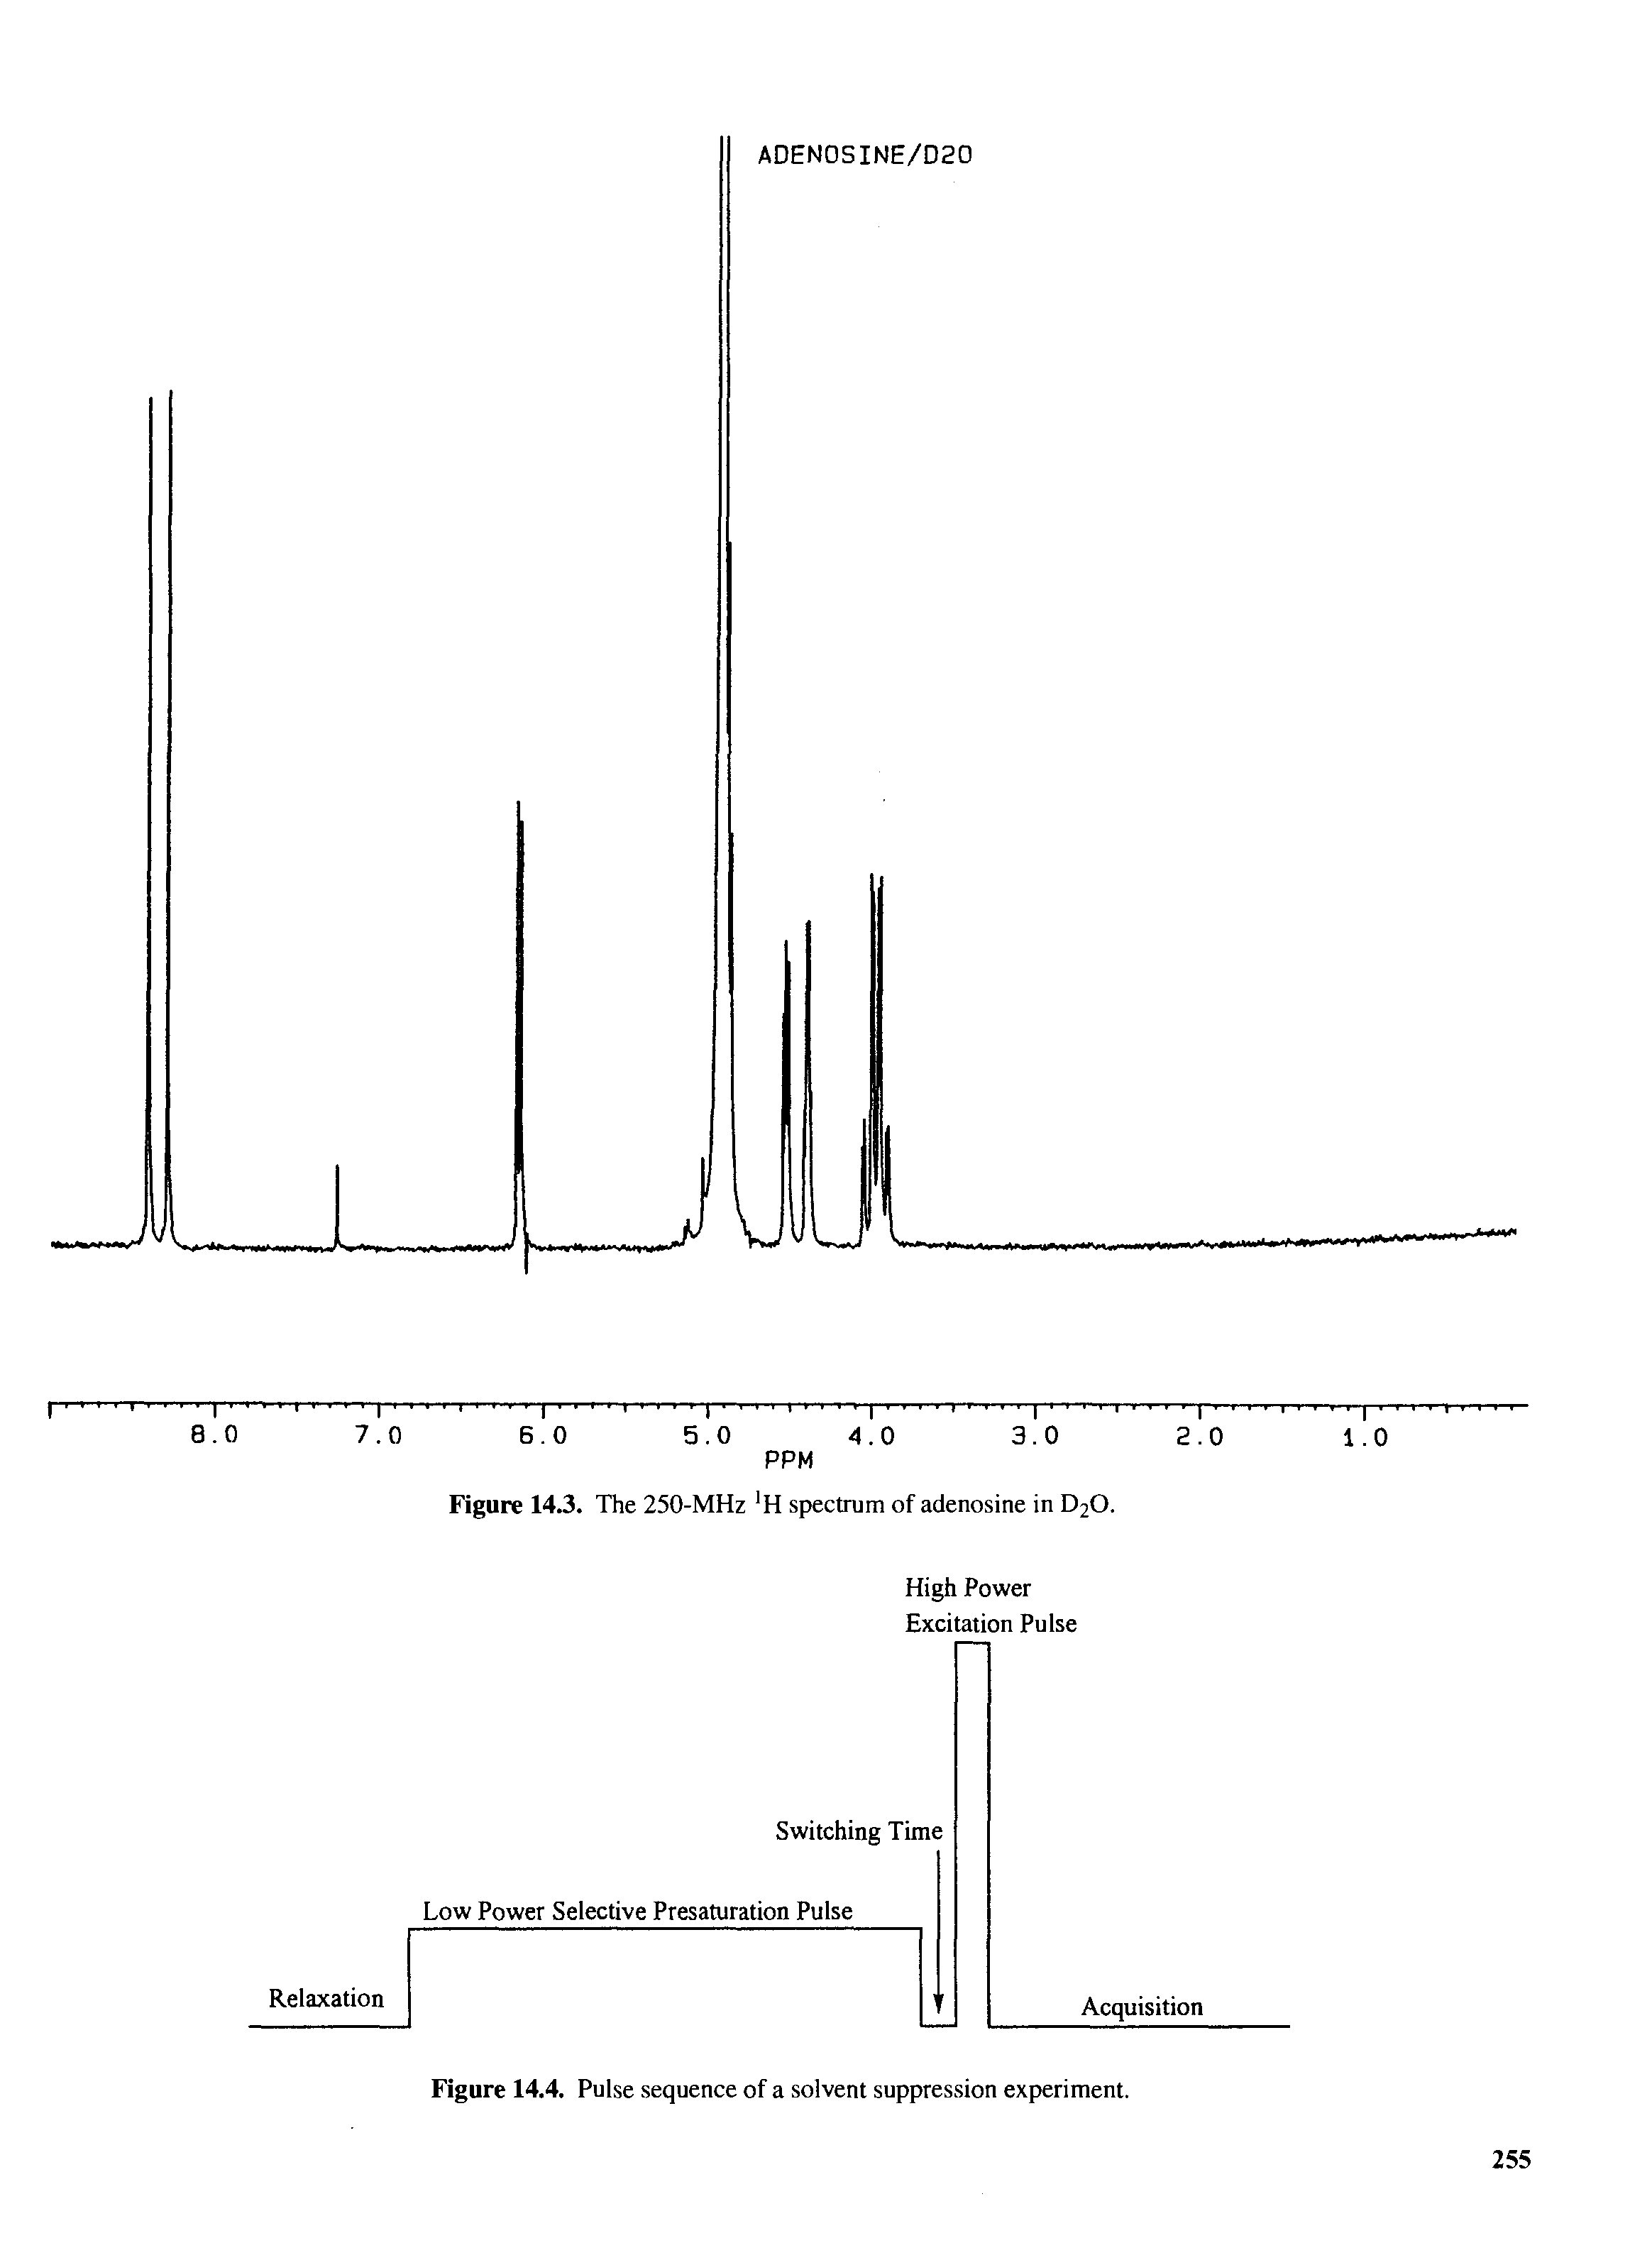 Figure 14.4. Pulse sequence of a solvent suppression experiment.